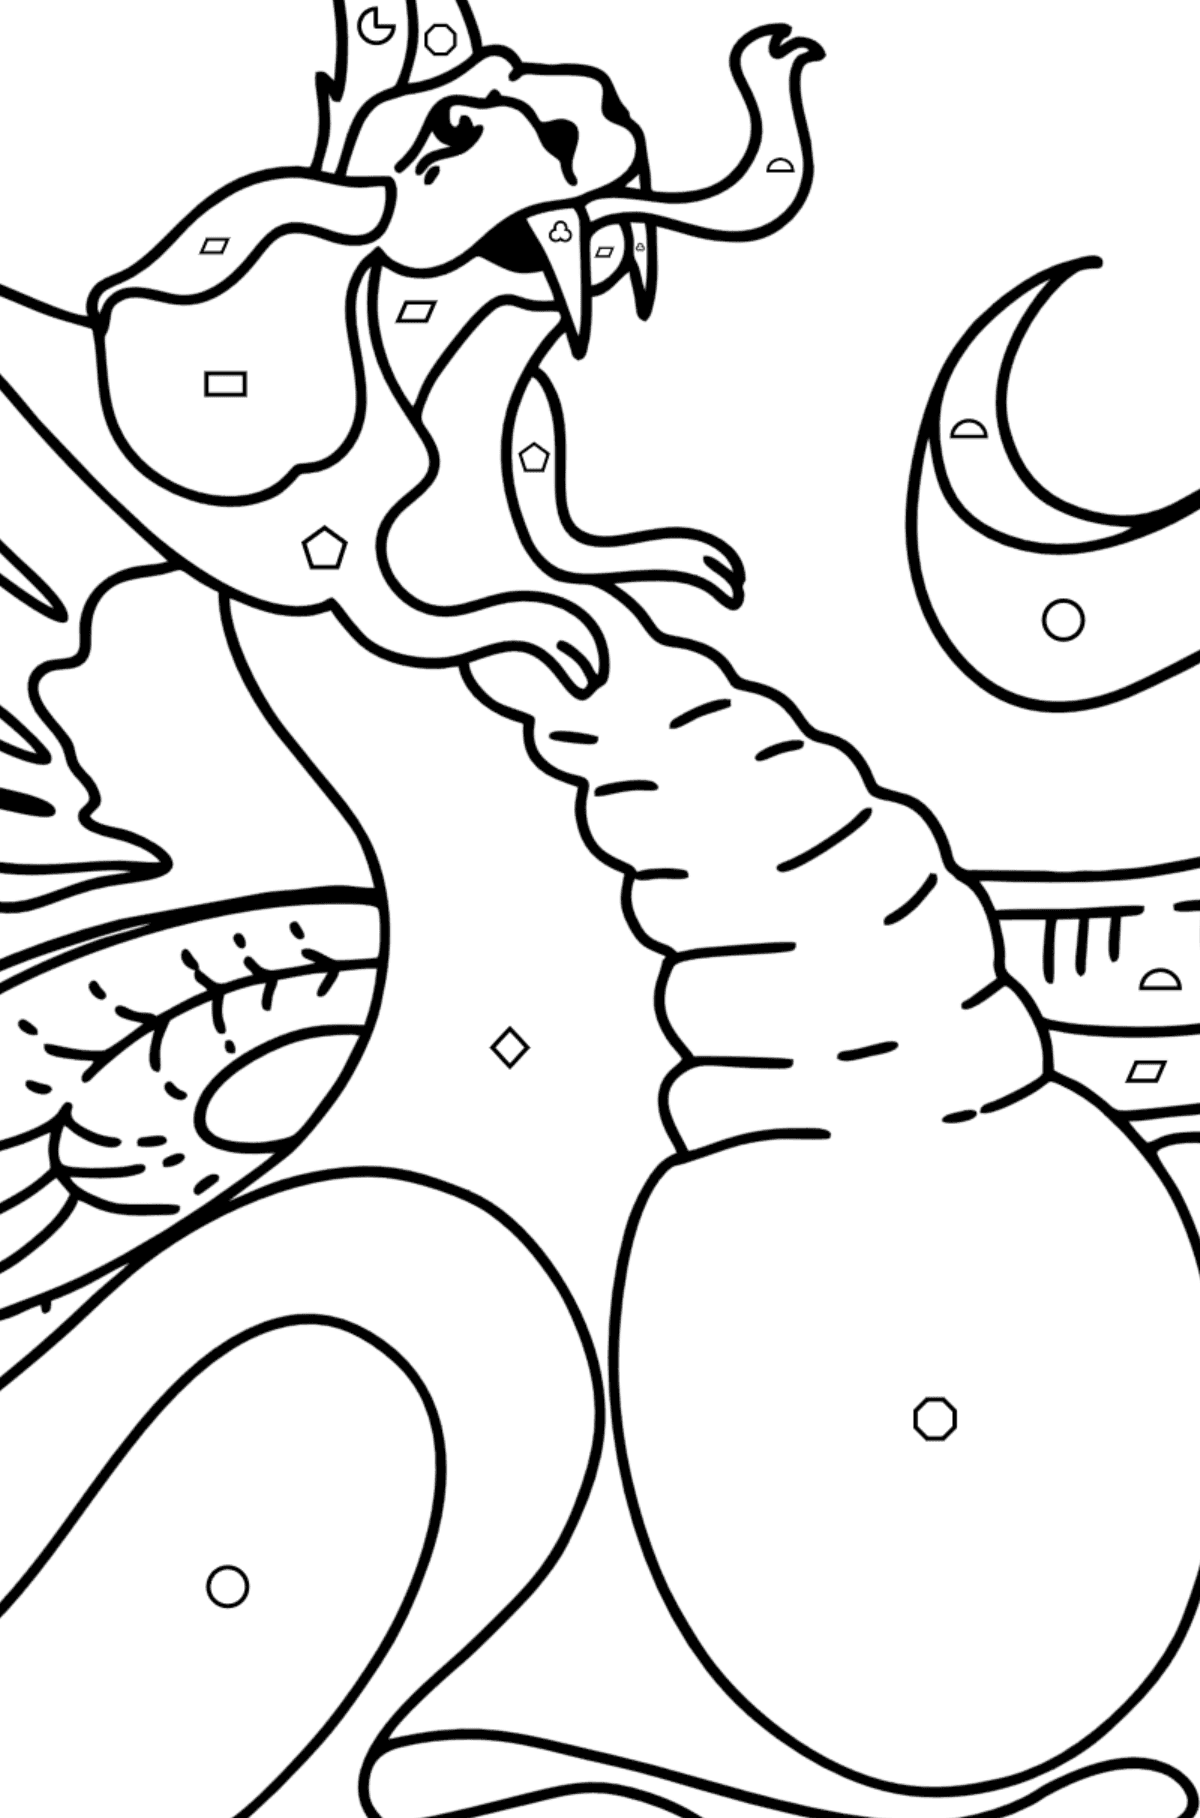 Tired Dragon coloring page - Coloring by Geometric Shapes for Kids